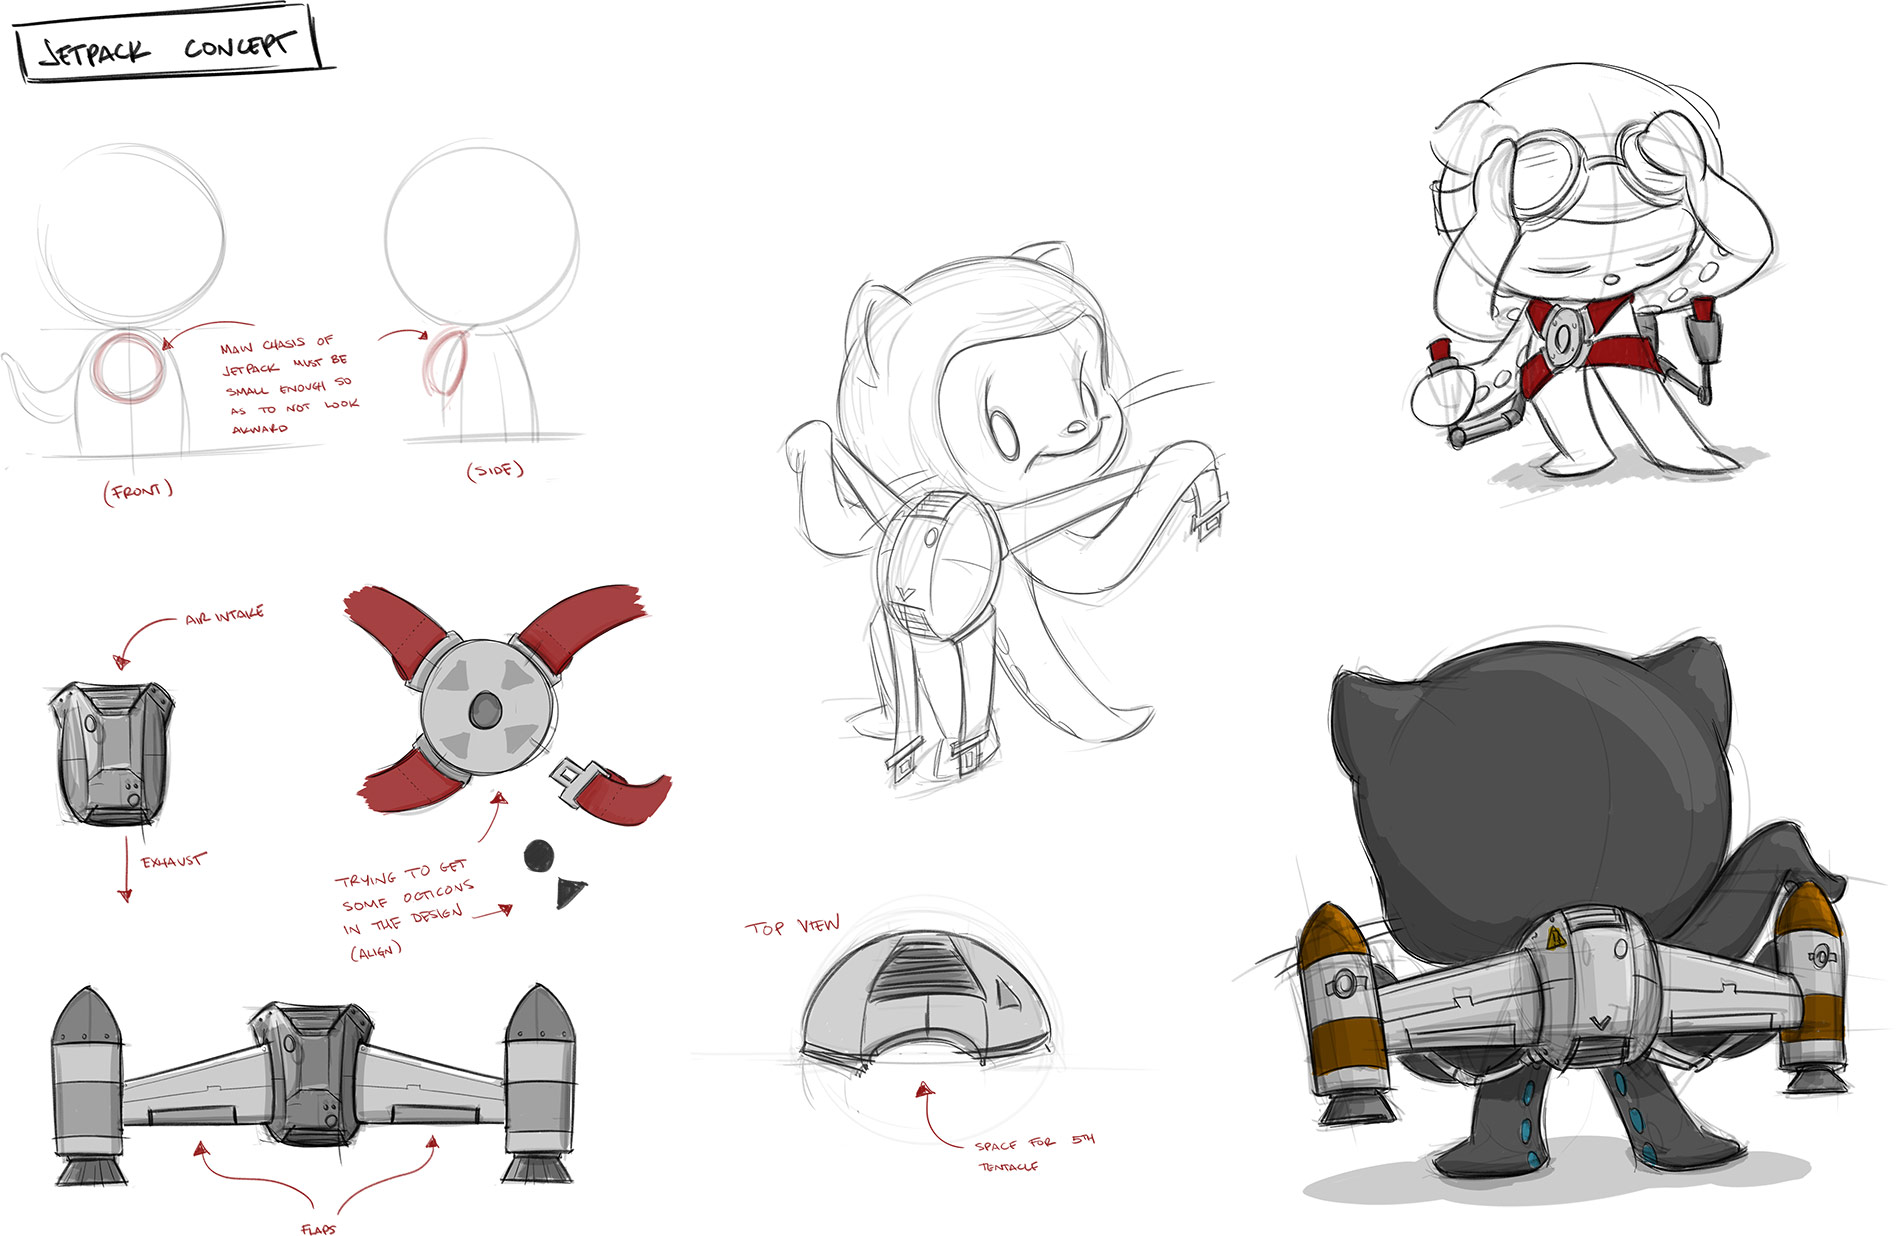 Early concept sketches developing the Octocat’s jetpack